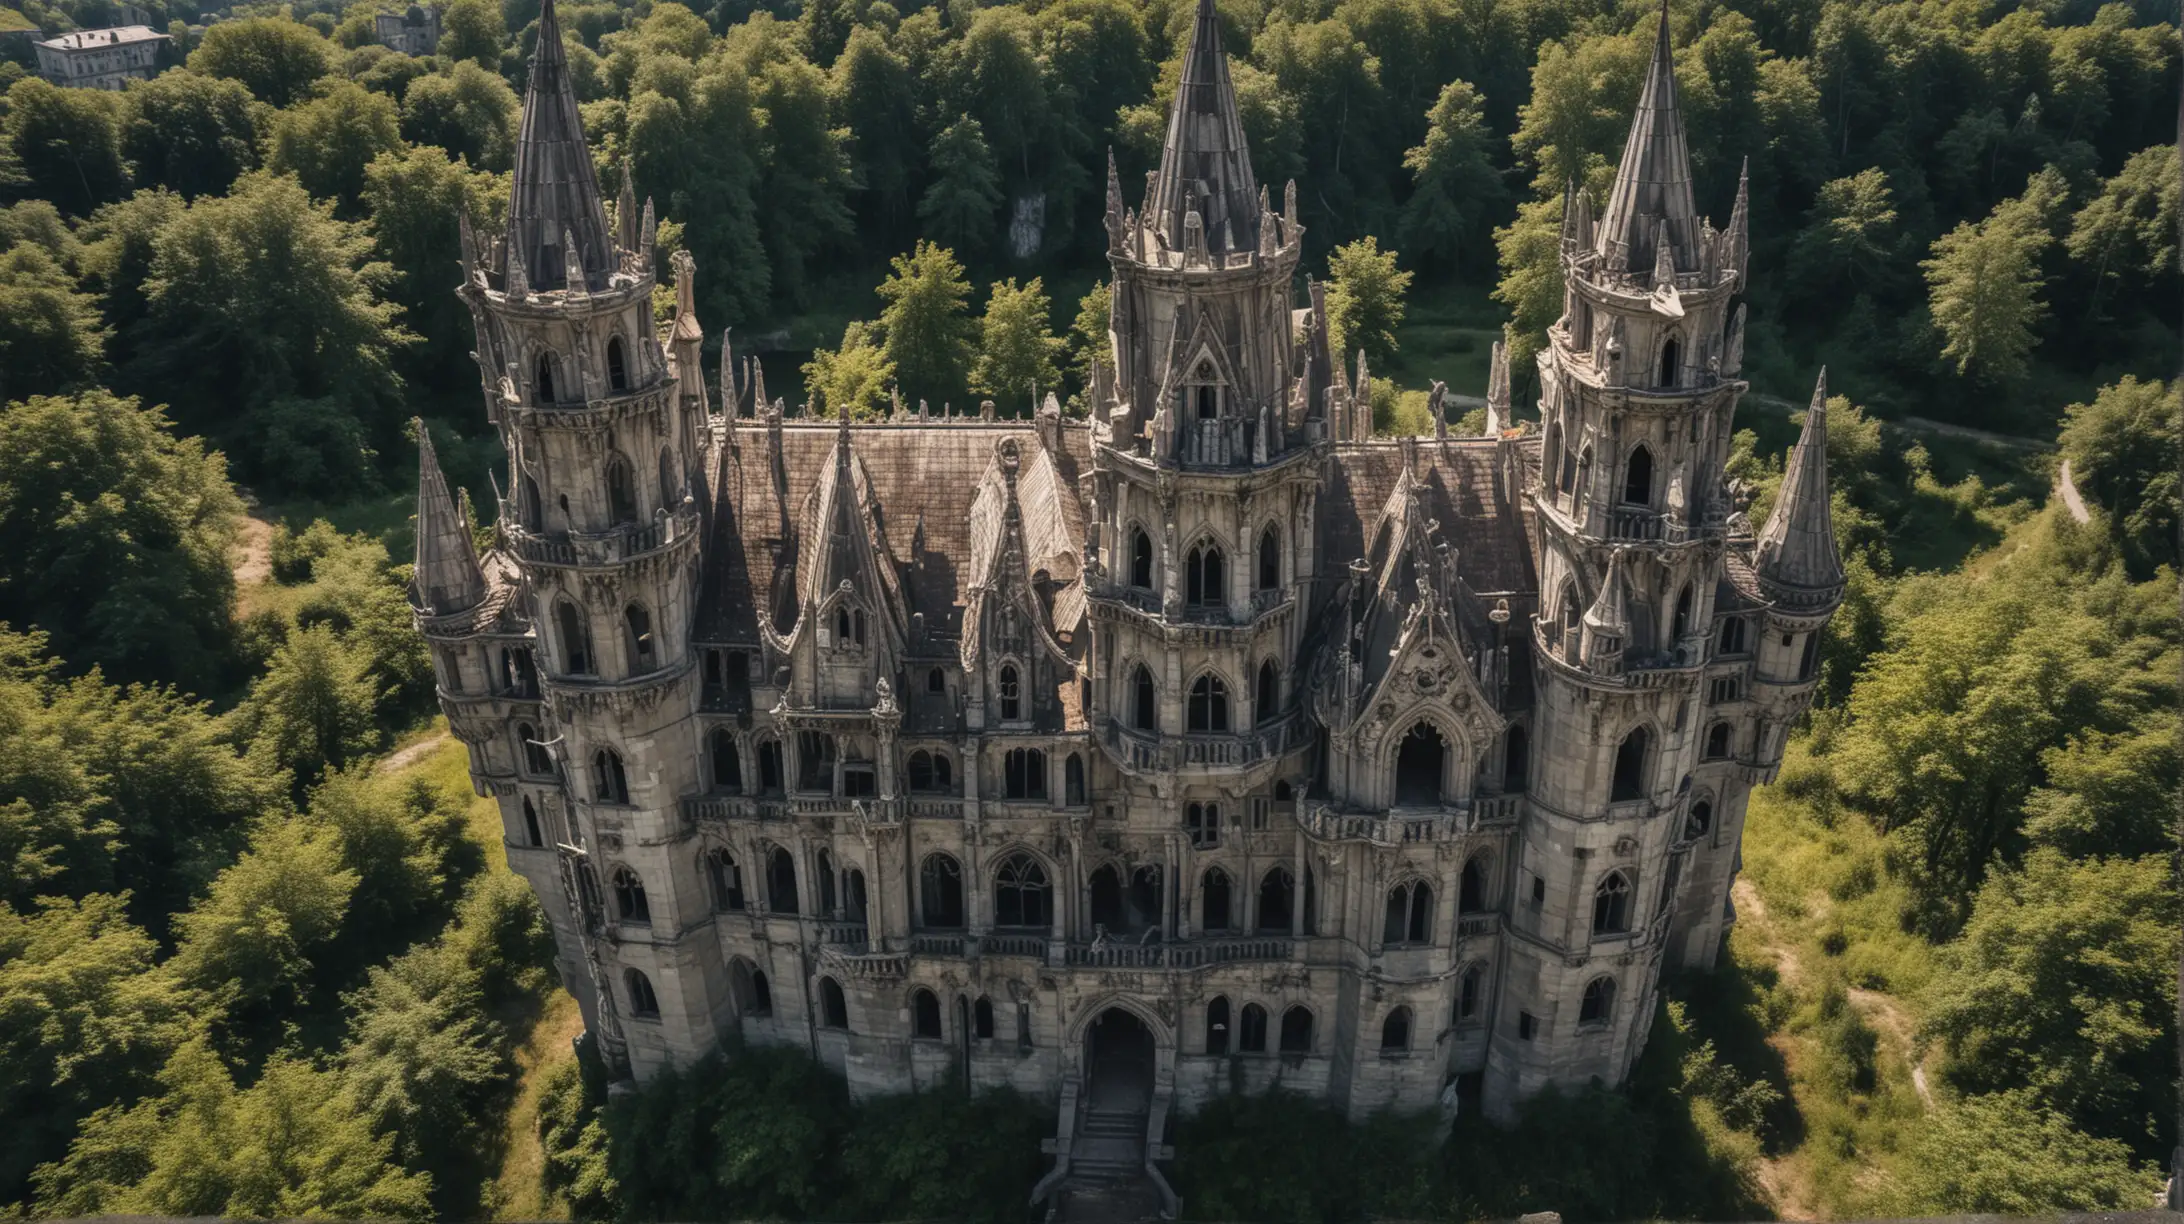 Aerial View of Abandoned Gothic Castle with Gargoyles and Masks